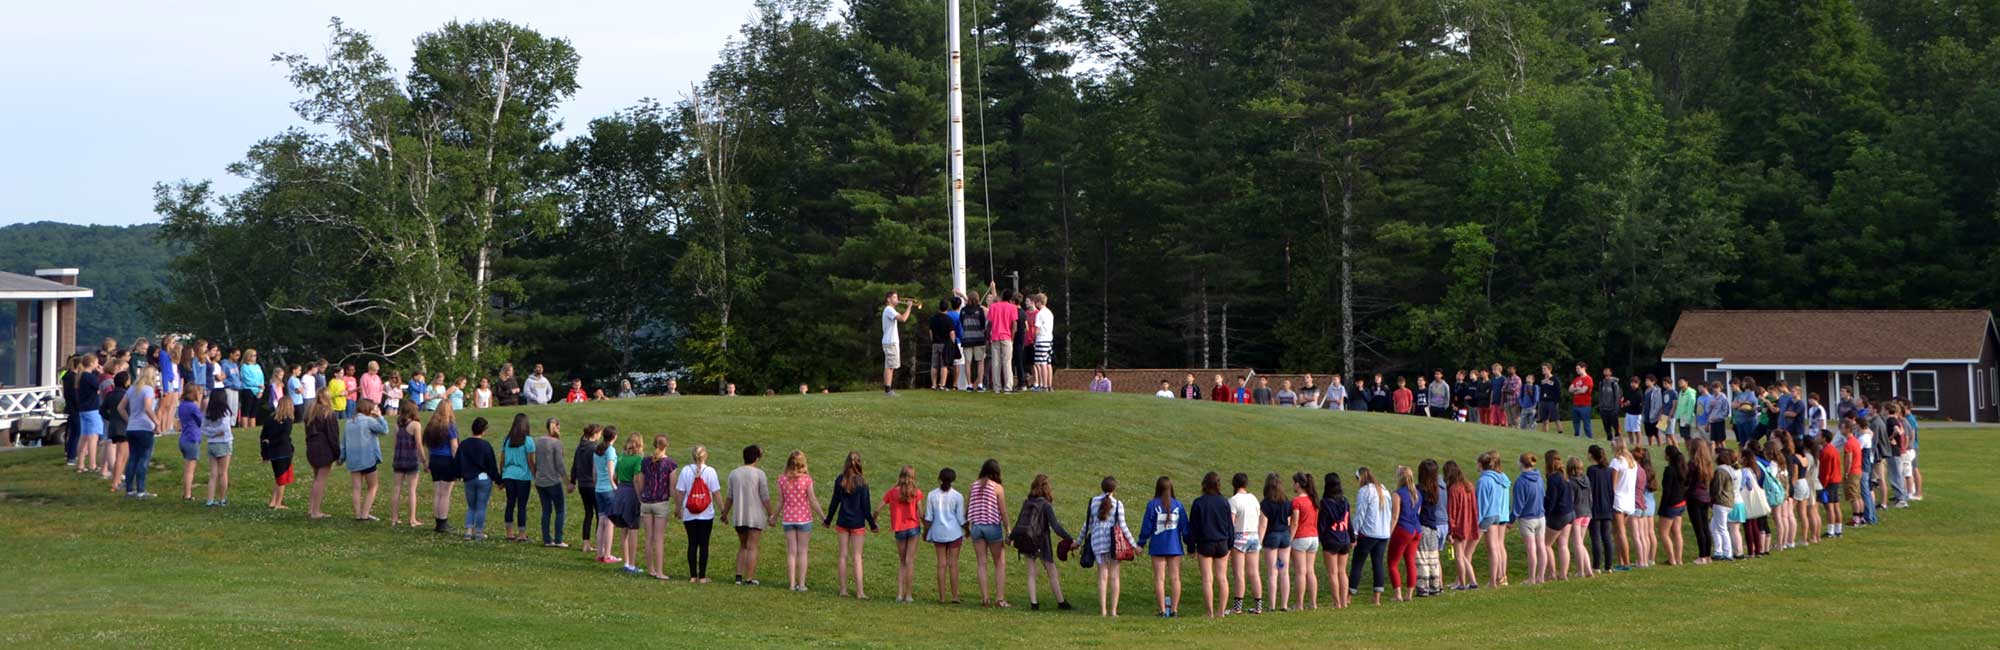 New England Music Camp, Summer Music and Theater Camp